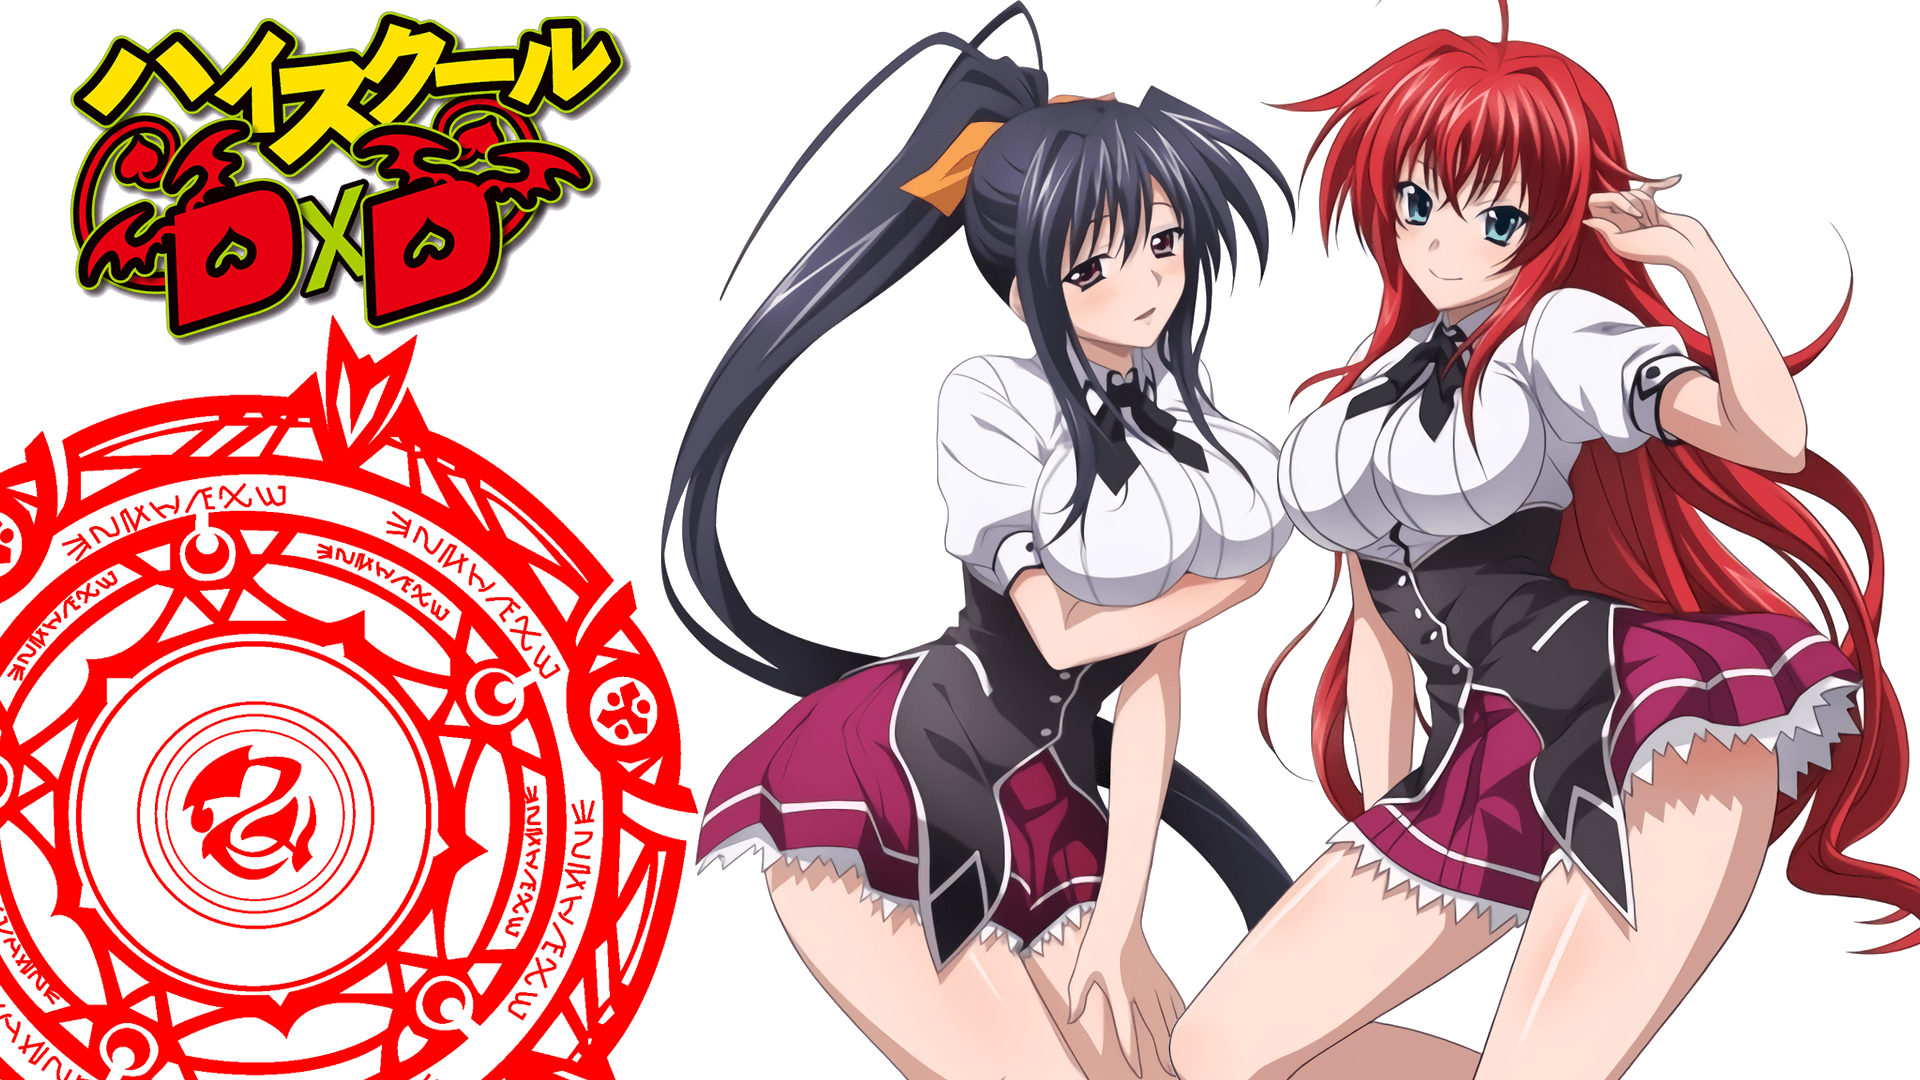 Here #TeamRias and #TeamAkeno, I made a new wallpaper for us